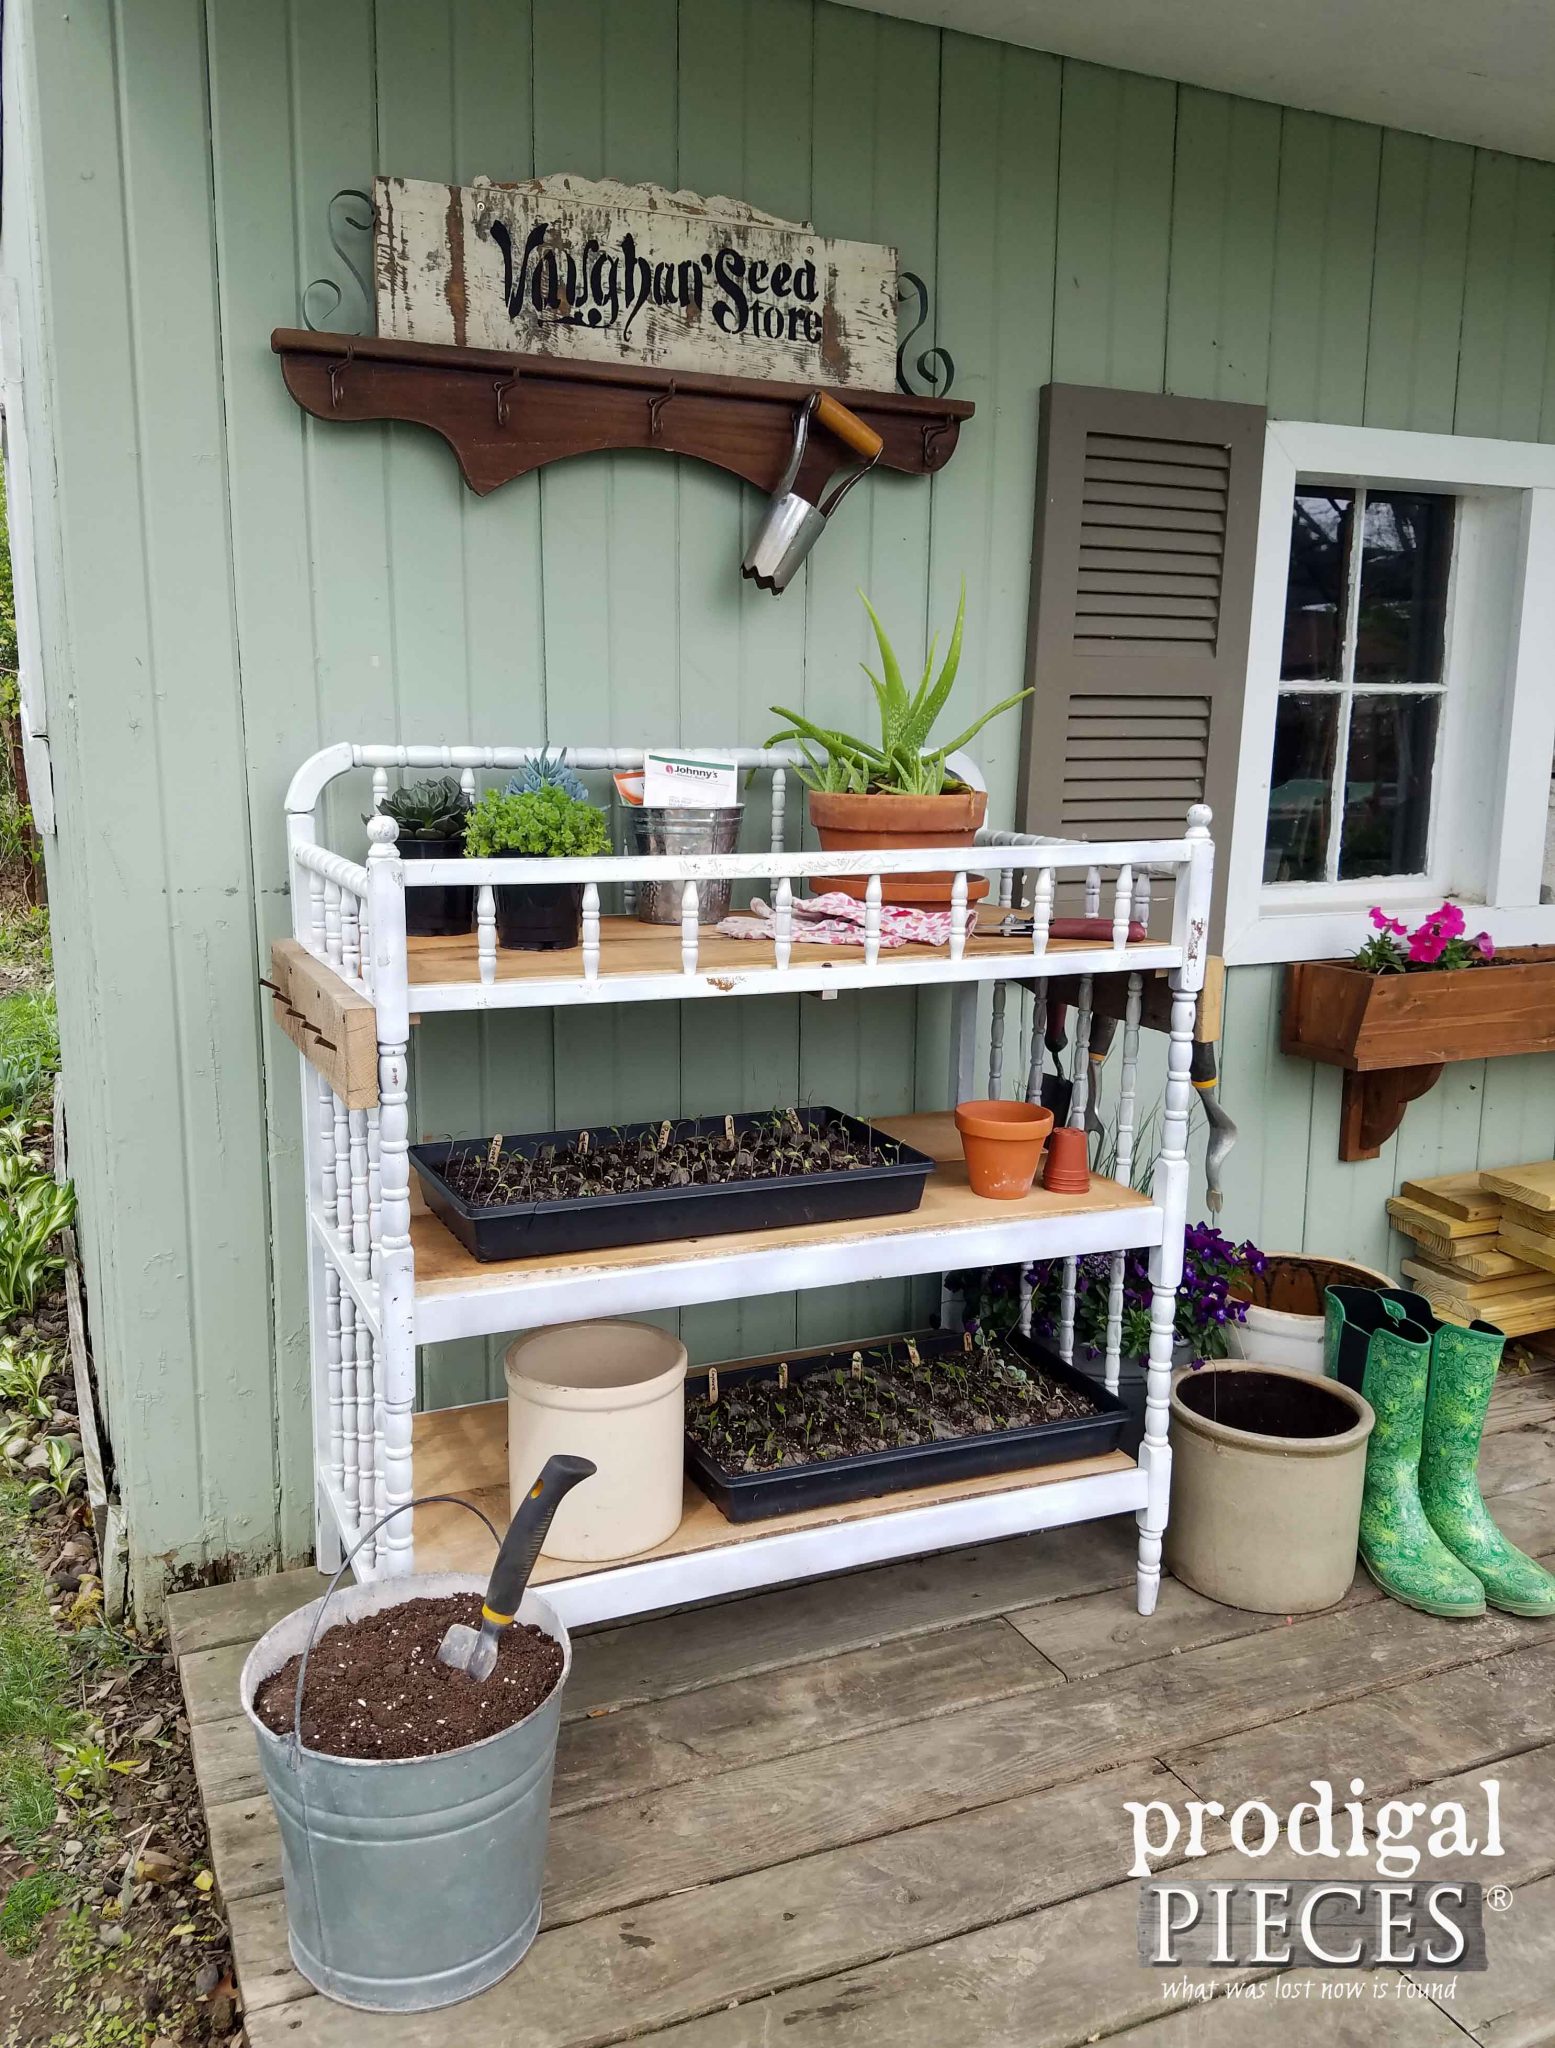 Potting Shed with Repurposed Changing Table Potting Bench by Prodigal Pieces | prodigalpieces.com